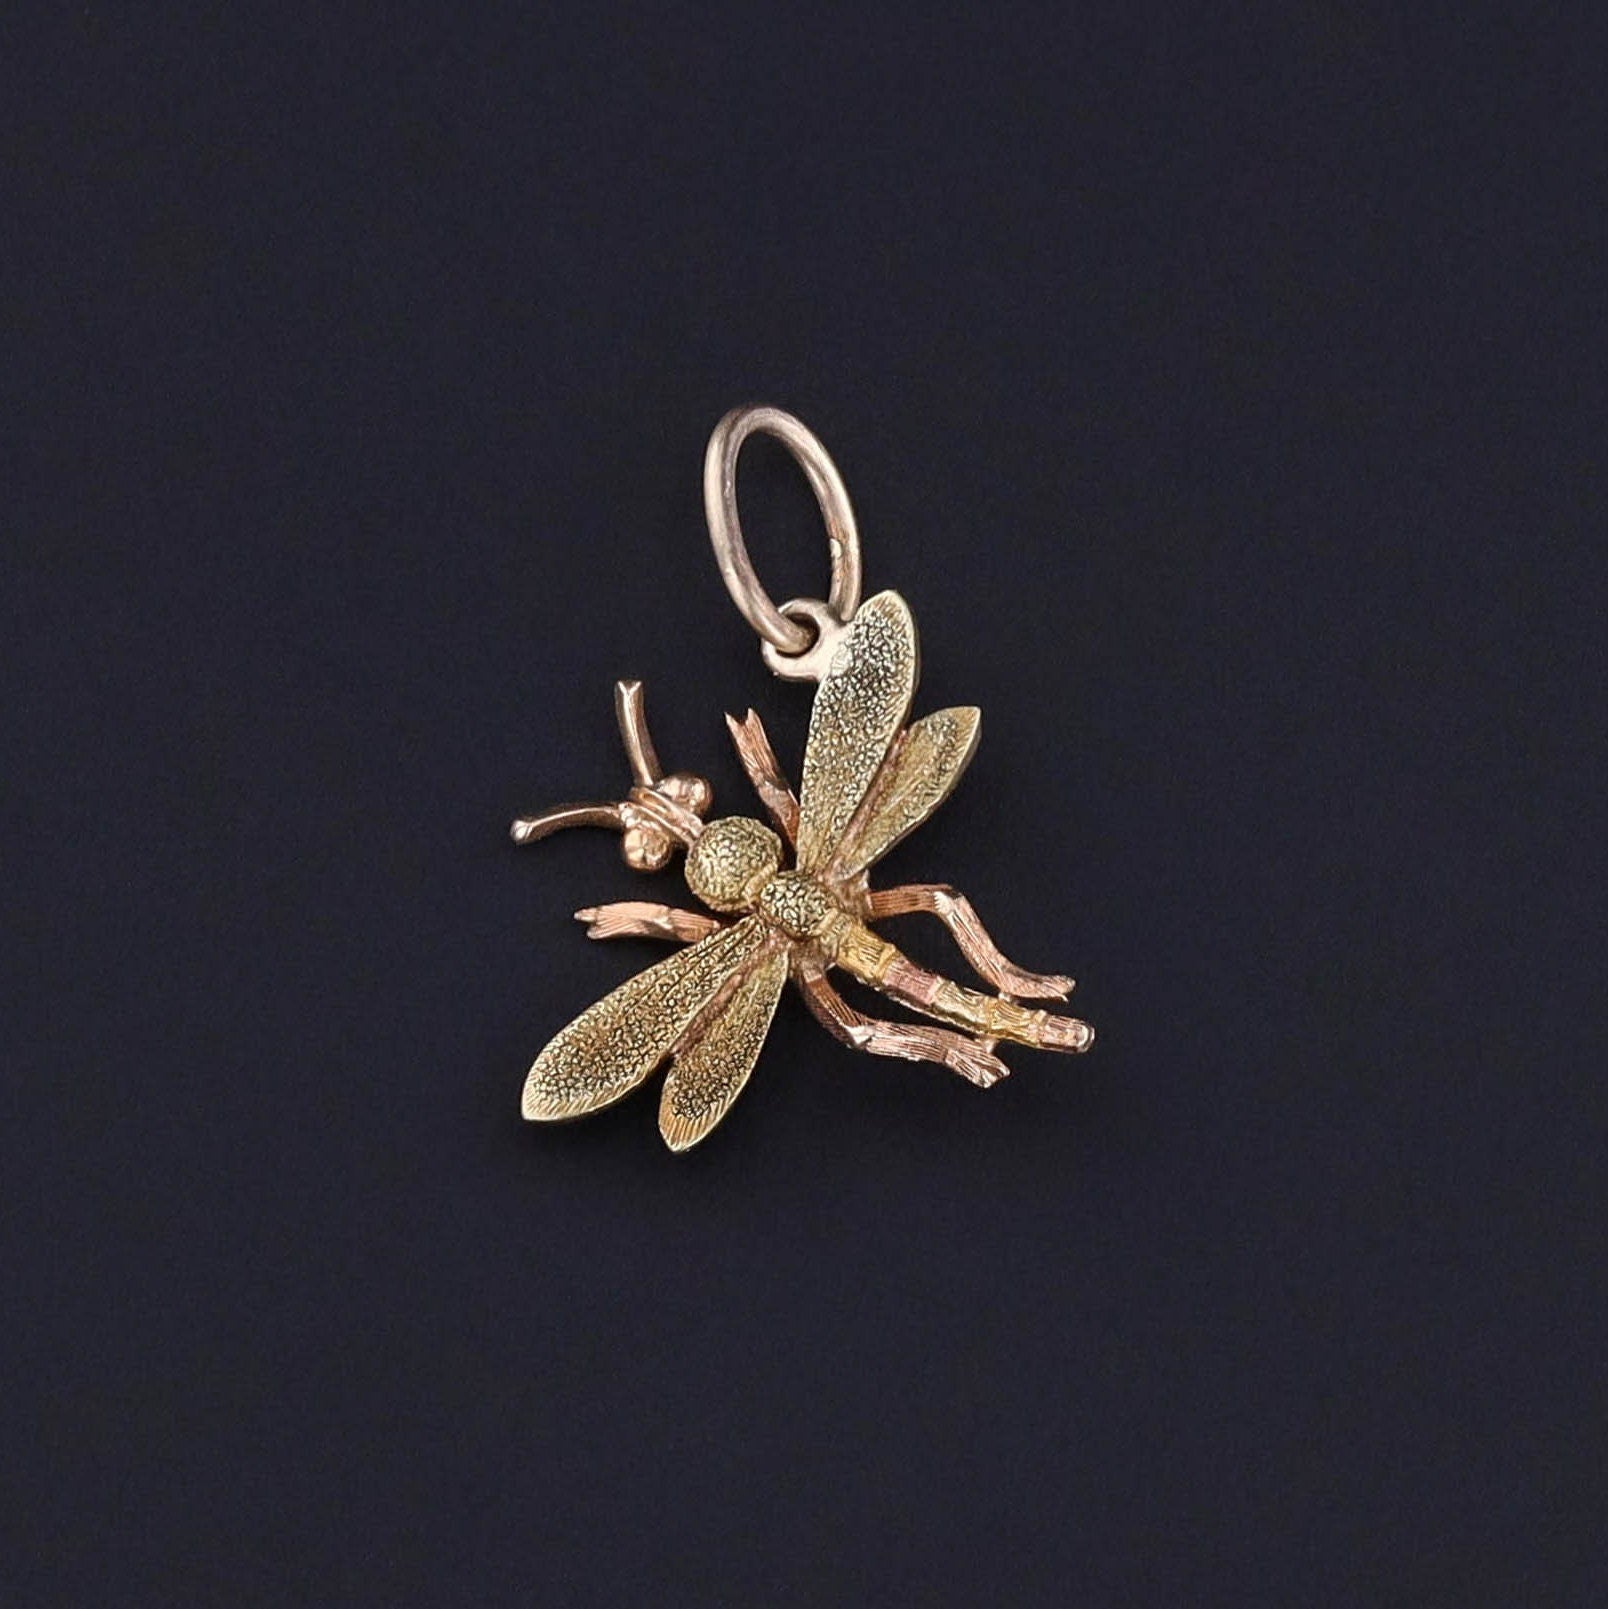 Antique Dragonfly Charm of 14k Gold